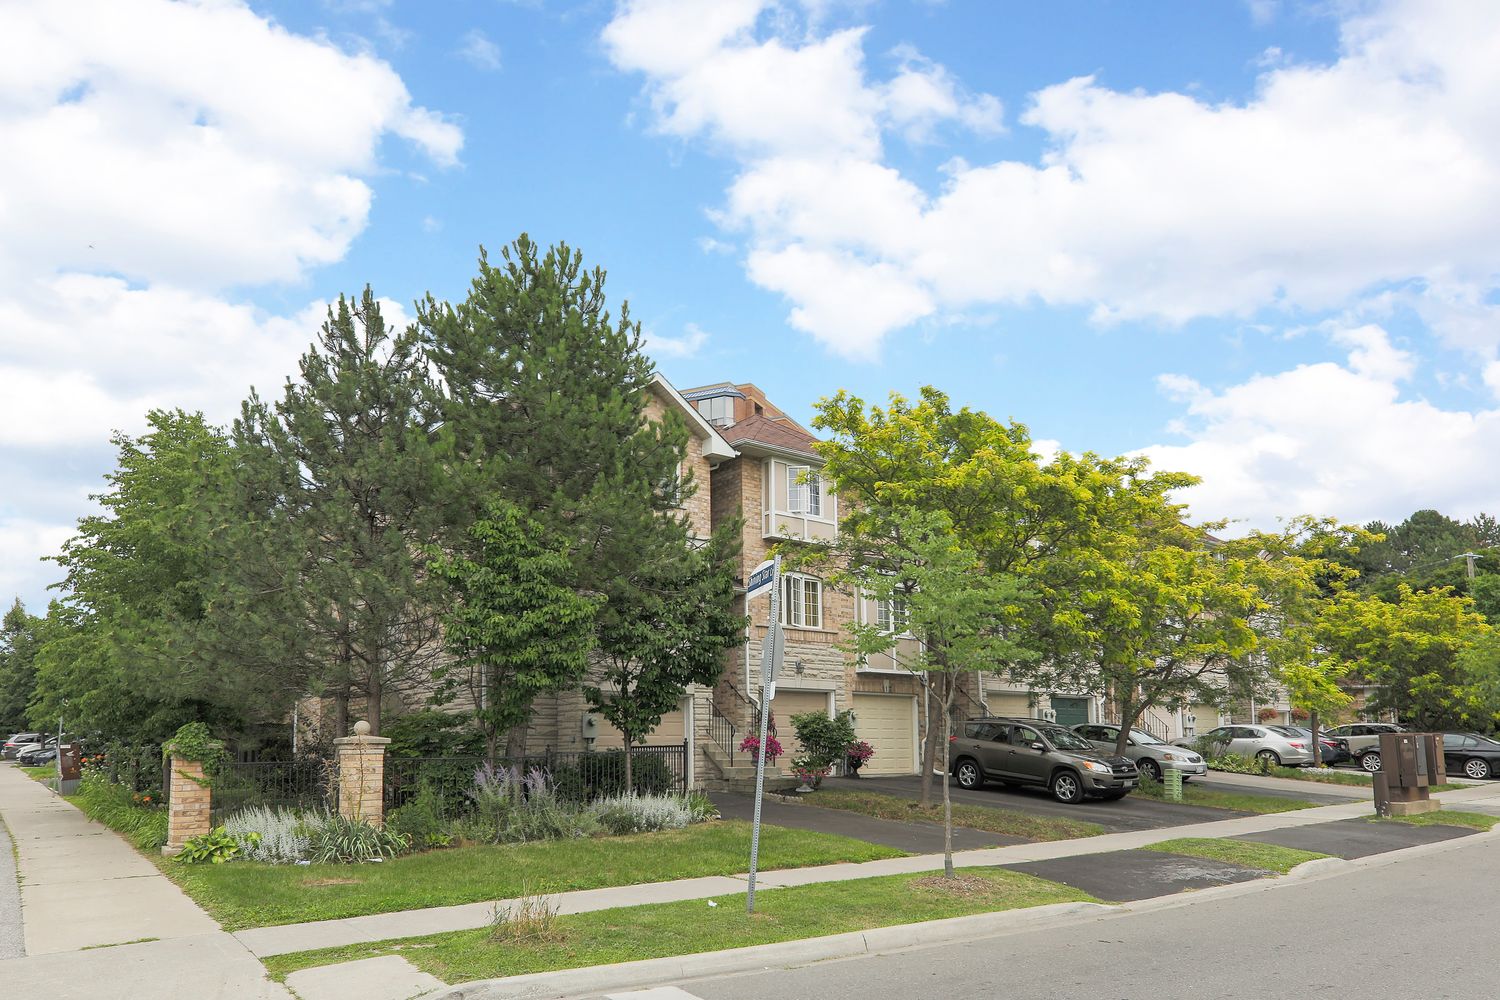 14-75 Shining Star Crescent. Shining Star Crescent Townhomes is located in  York Crosstown, Toronto - image #1 of 4